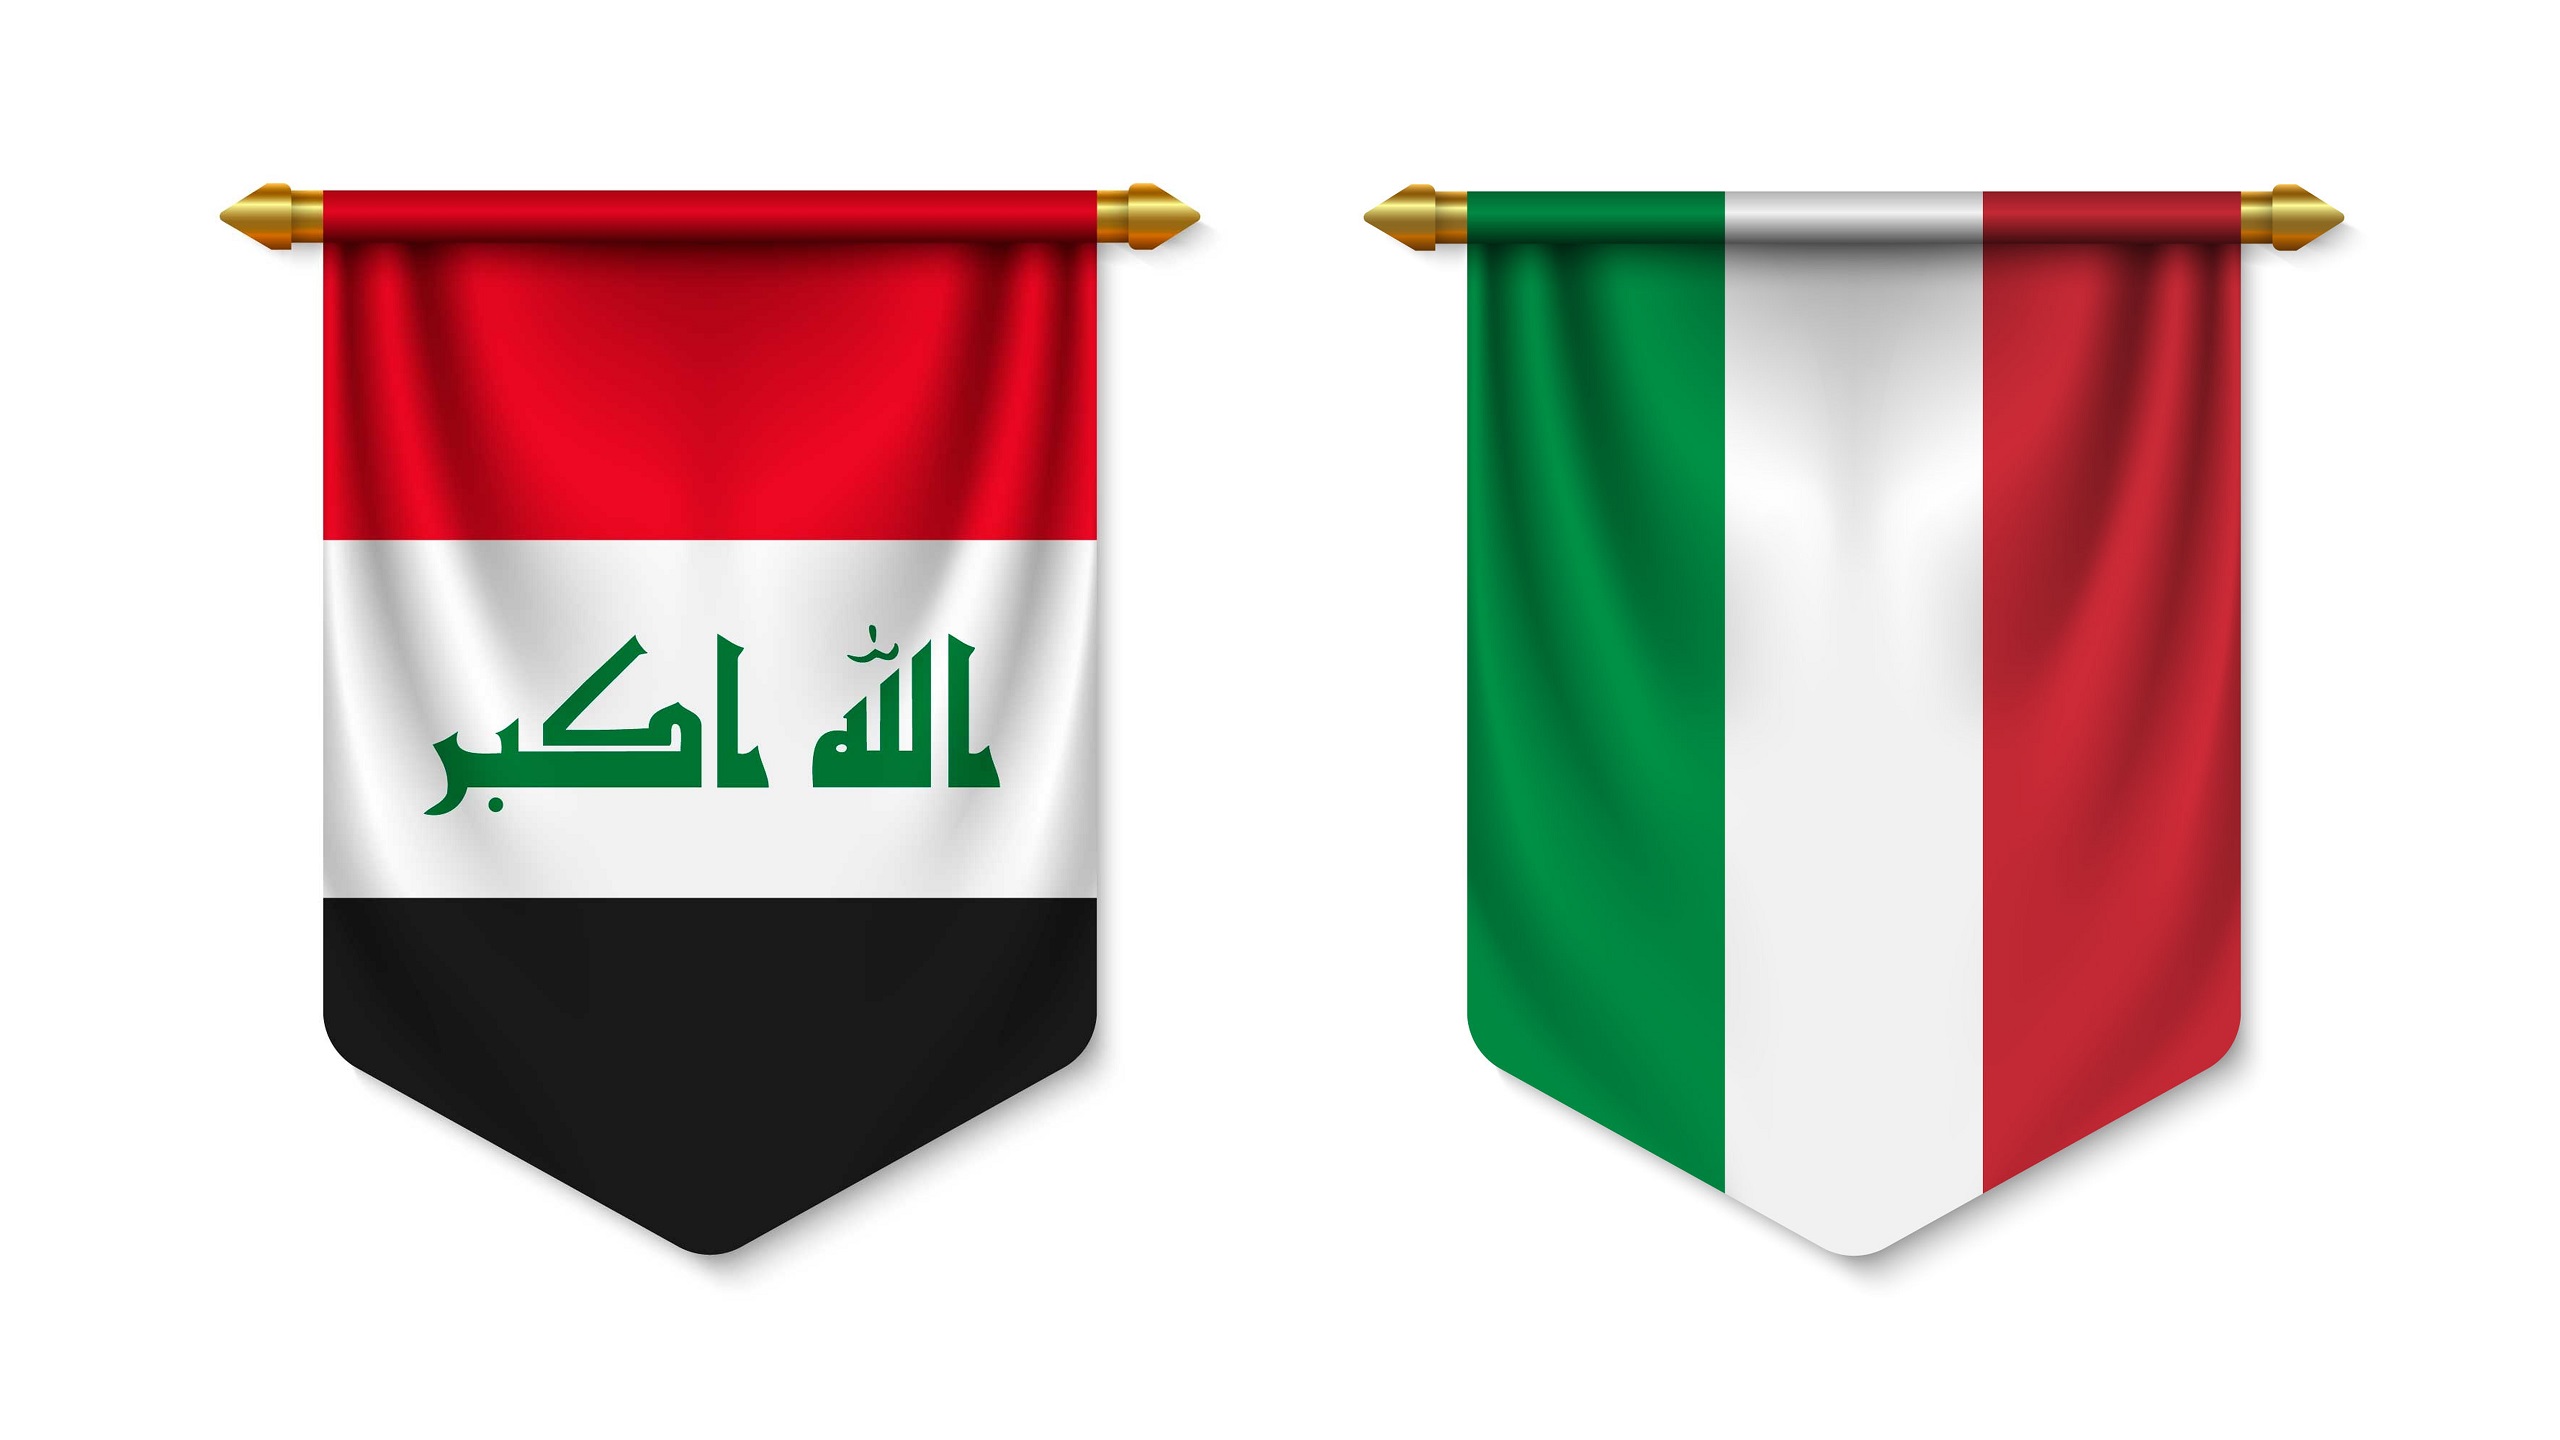 Italian Defense Minister Visits Iraq To Strengthen Bilateral Ties, Cooperation